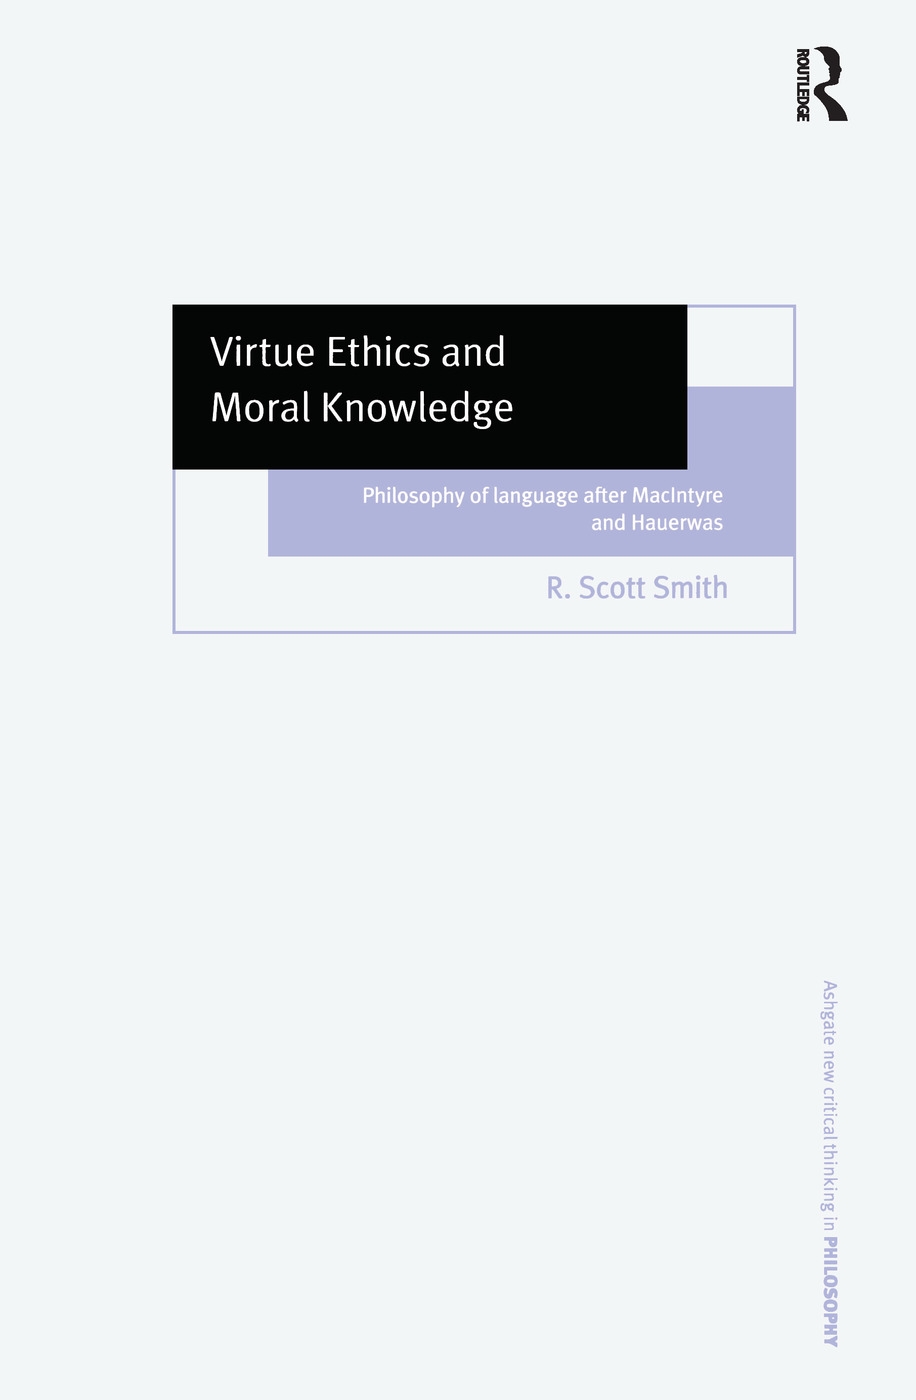 Virtue Ethics and Moral Knowledge: Philosophy of Language After Macintyre and Hauerwas